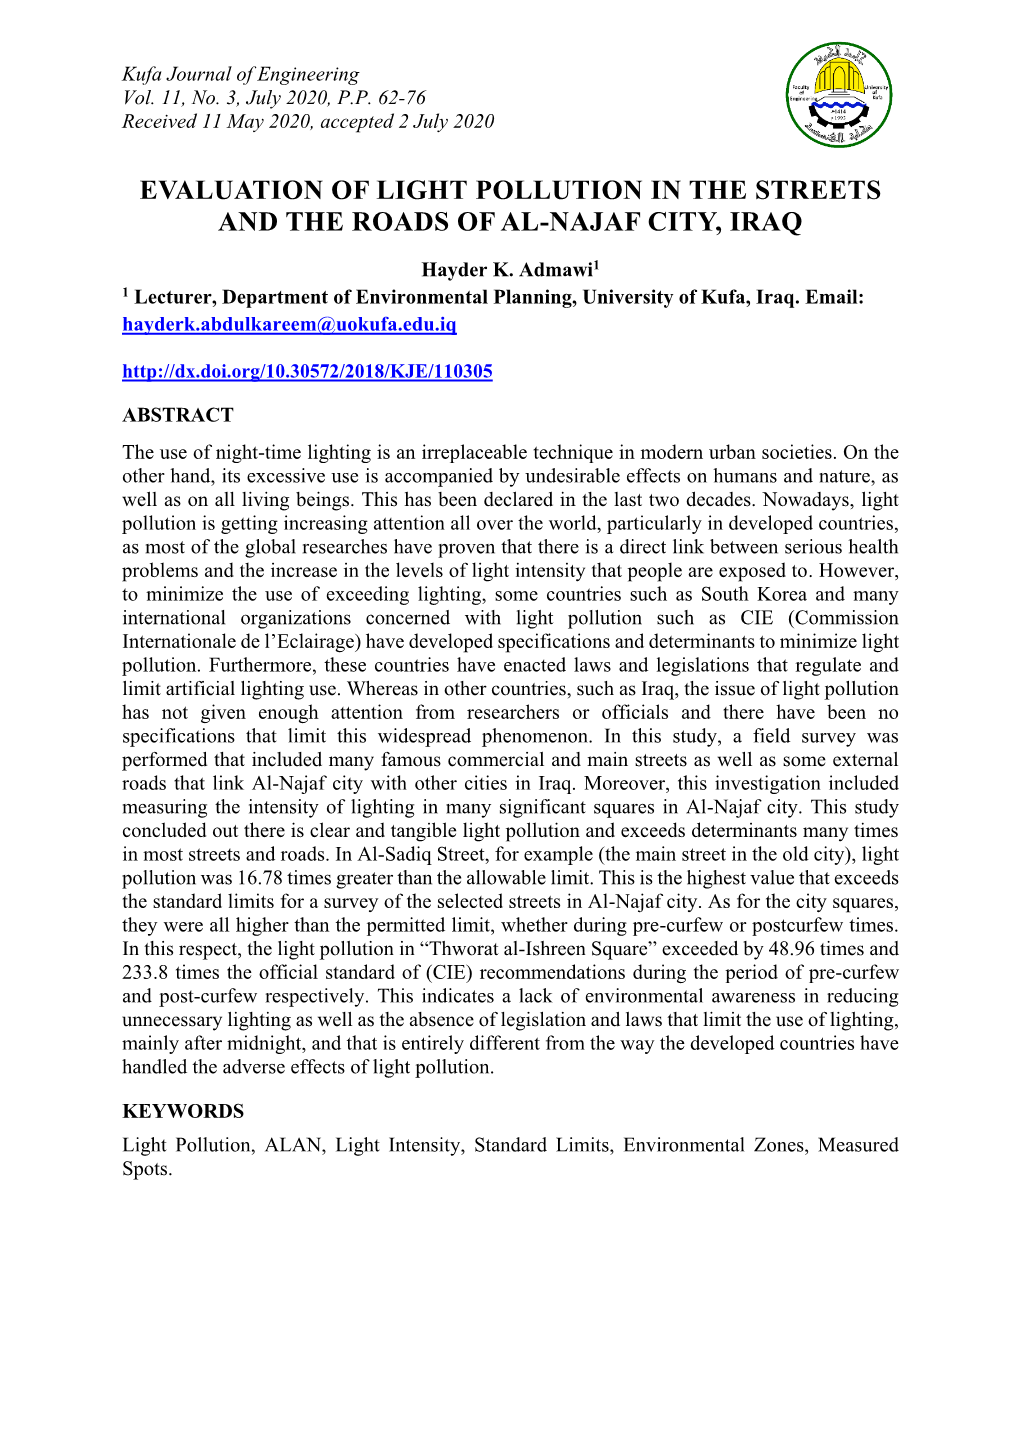 Evaluation of Light Pollution in the Streets and the Roads of Al-Najaf City, Iraq